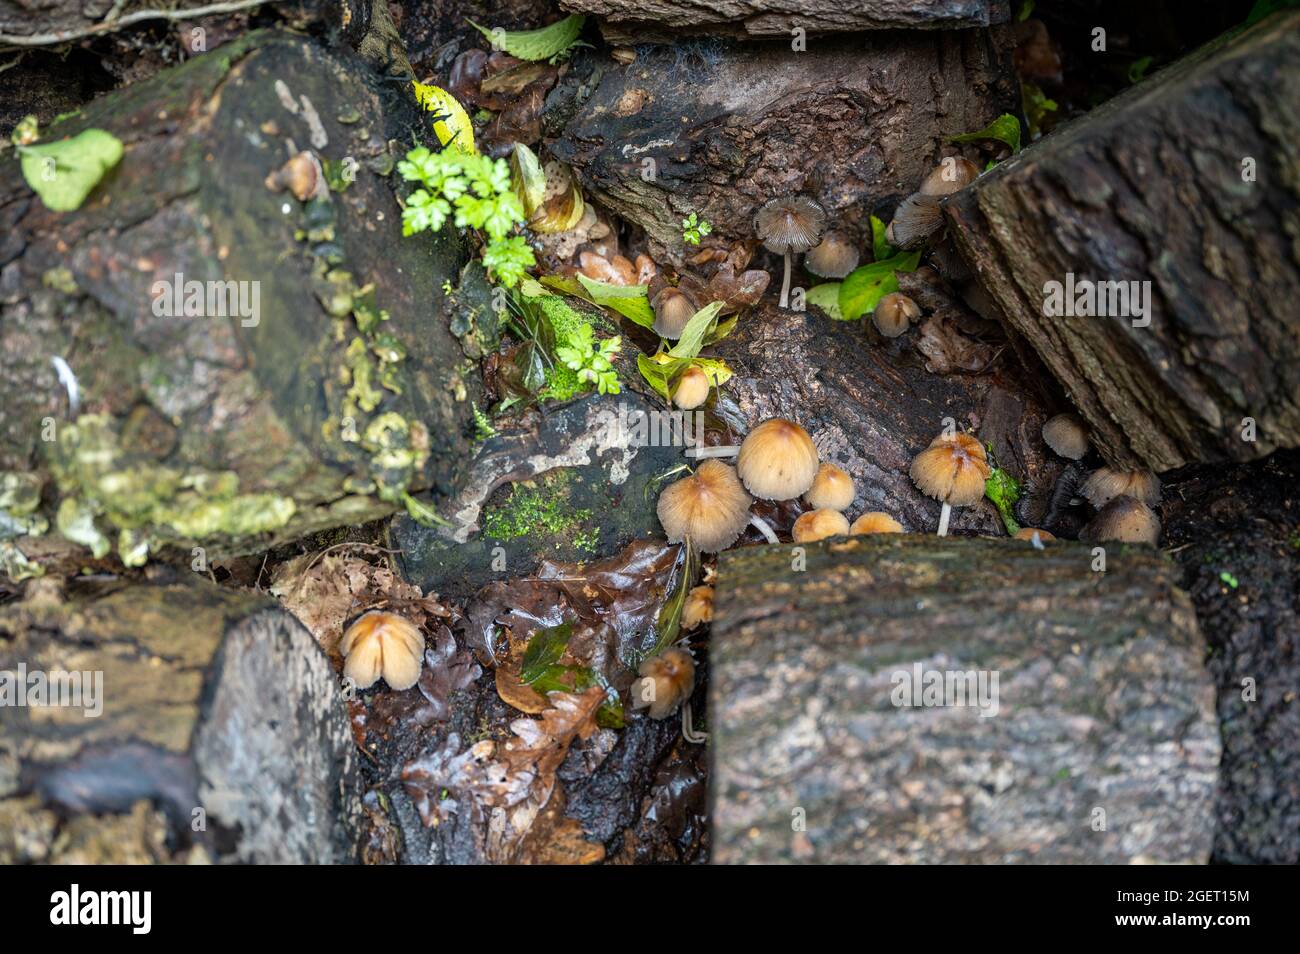 A number of small fungi growing amongst the logs in a damp log pile in early autumn. Stock Photo